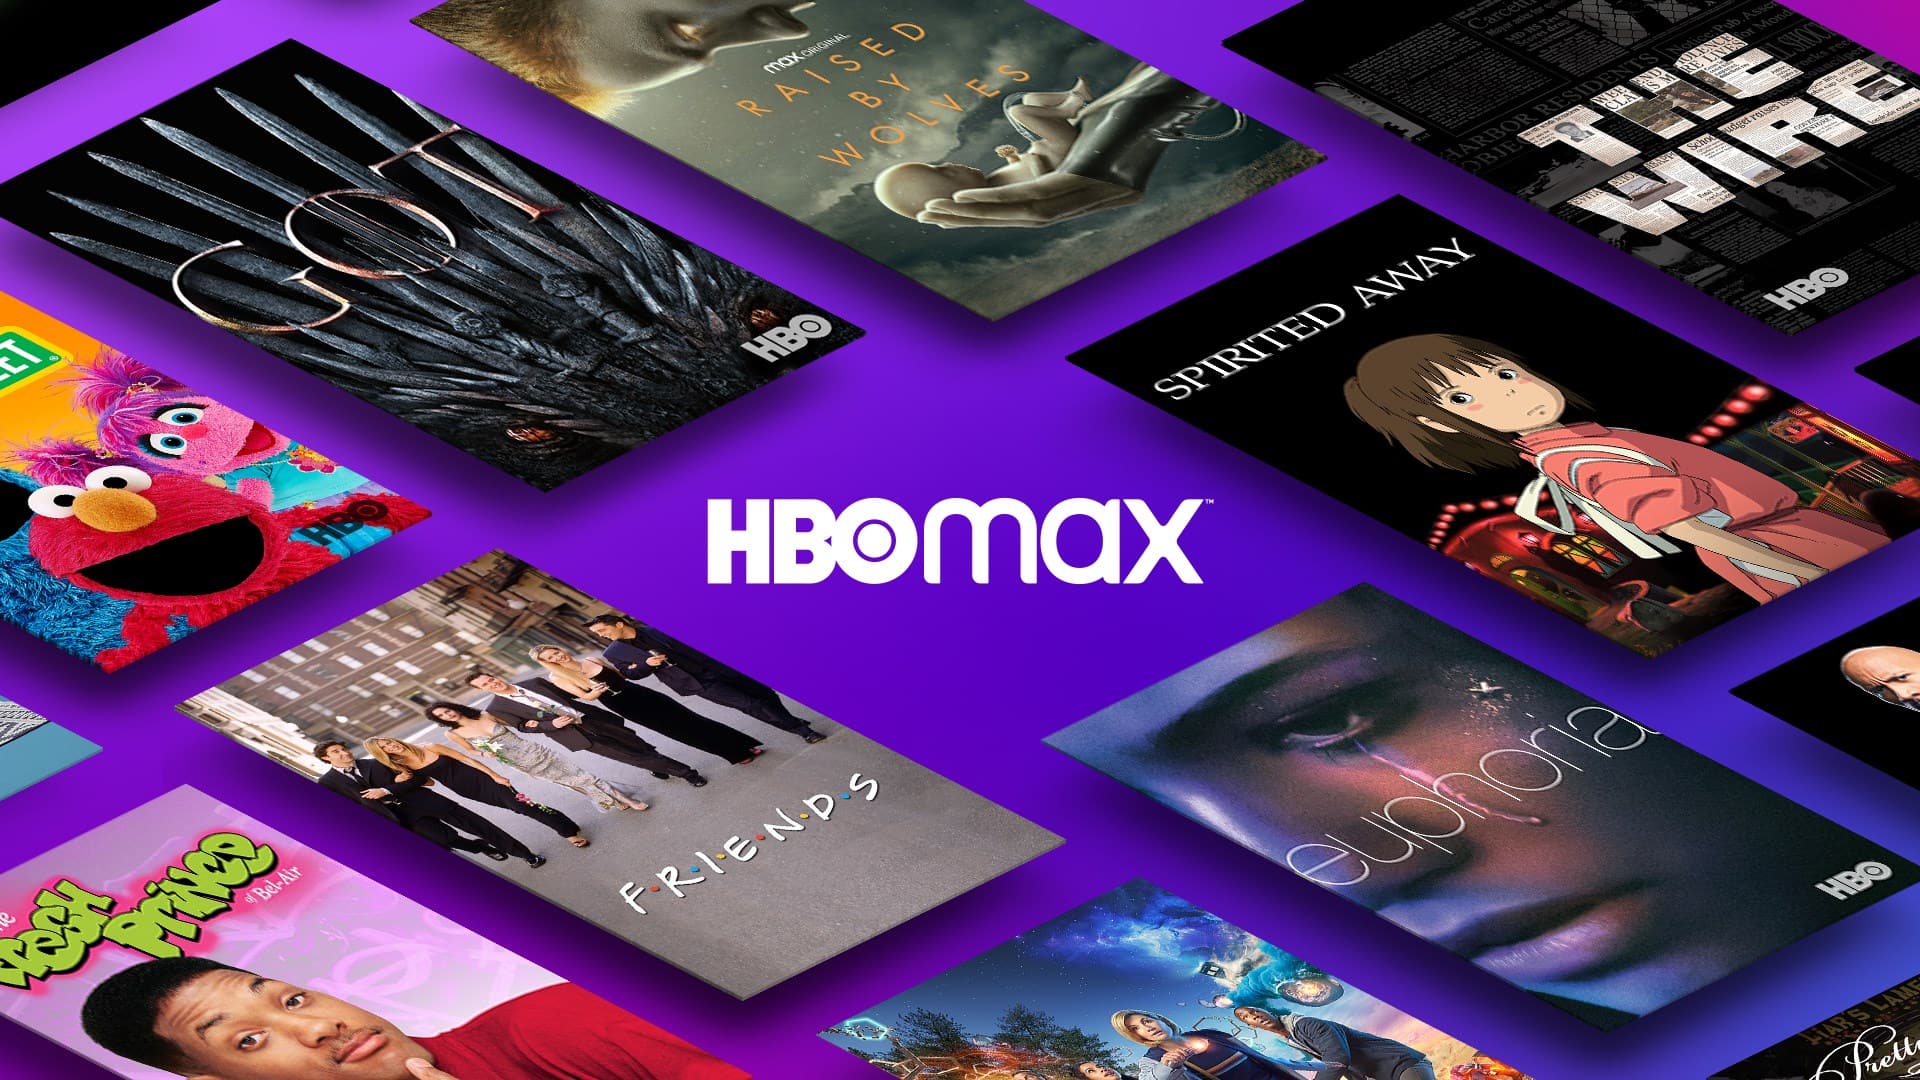 How to Get a HBO Max Free Trial For 7 Days See Here All Complete Steps